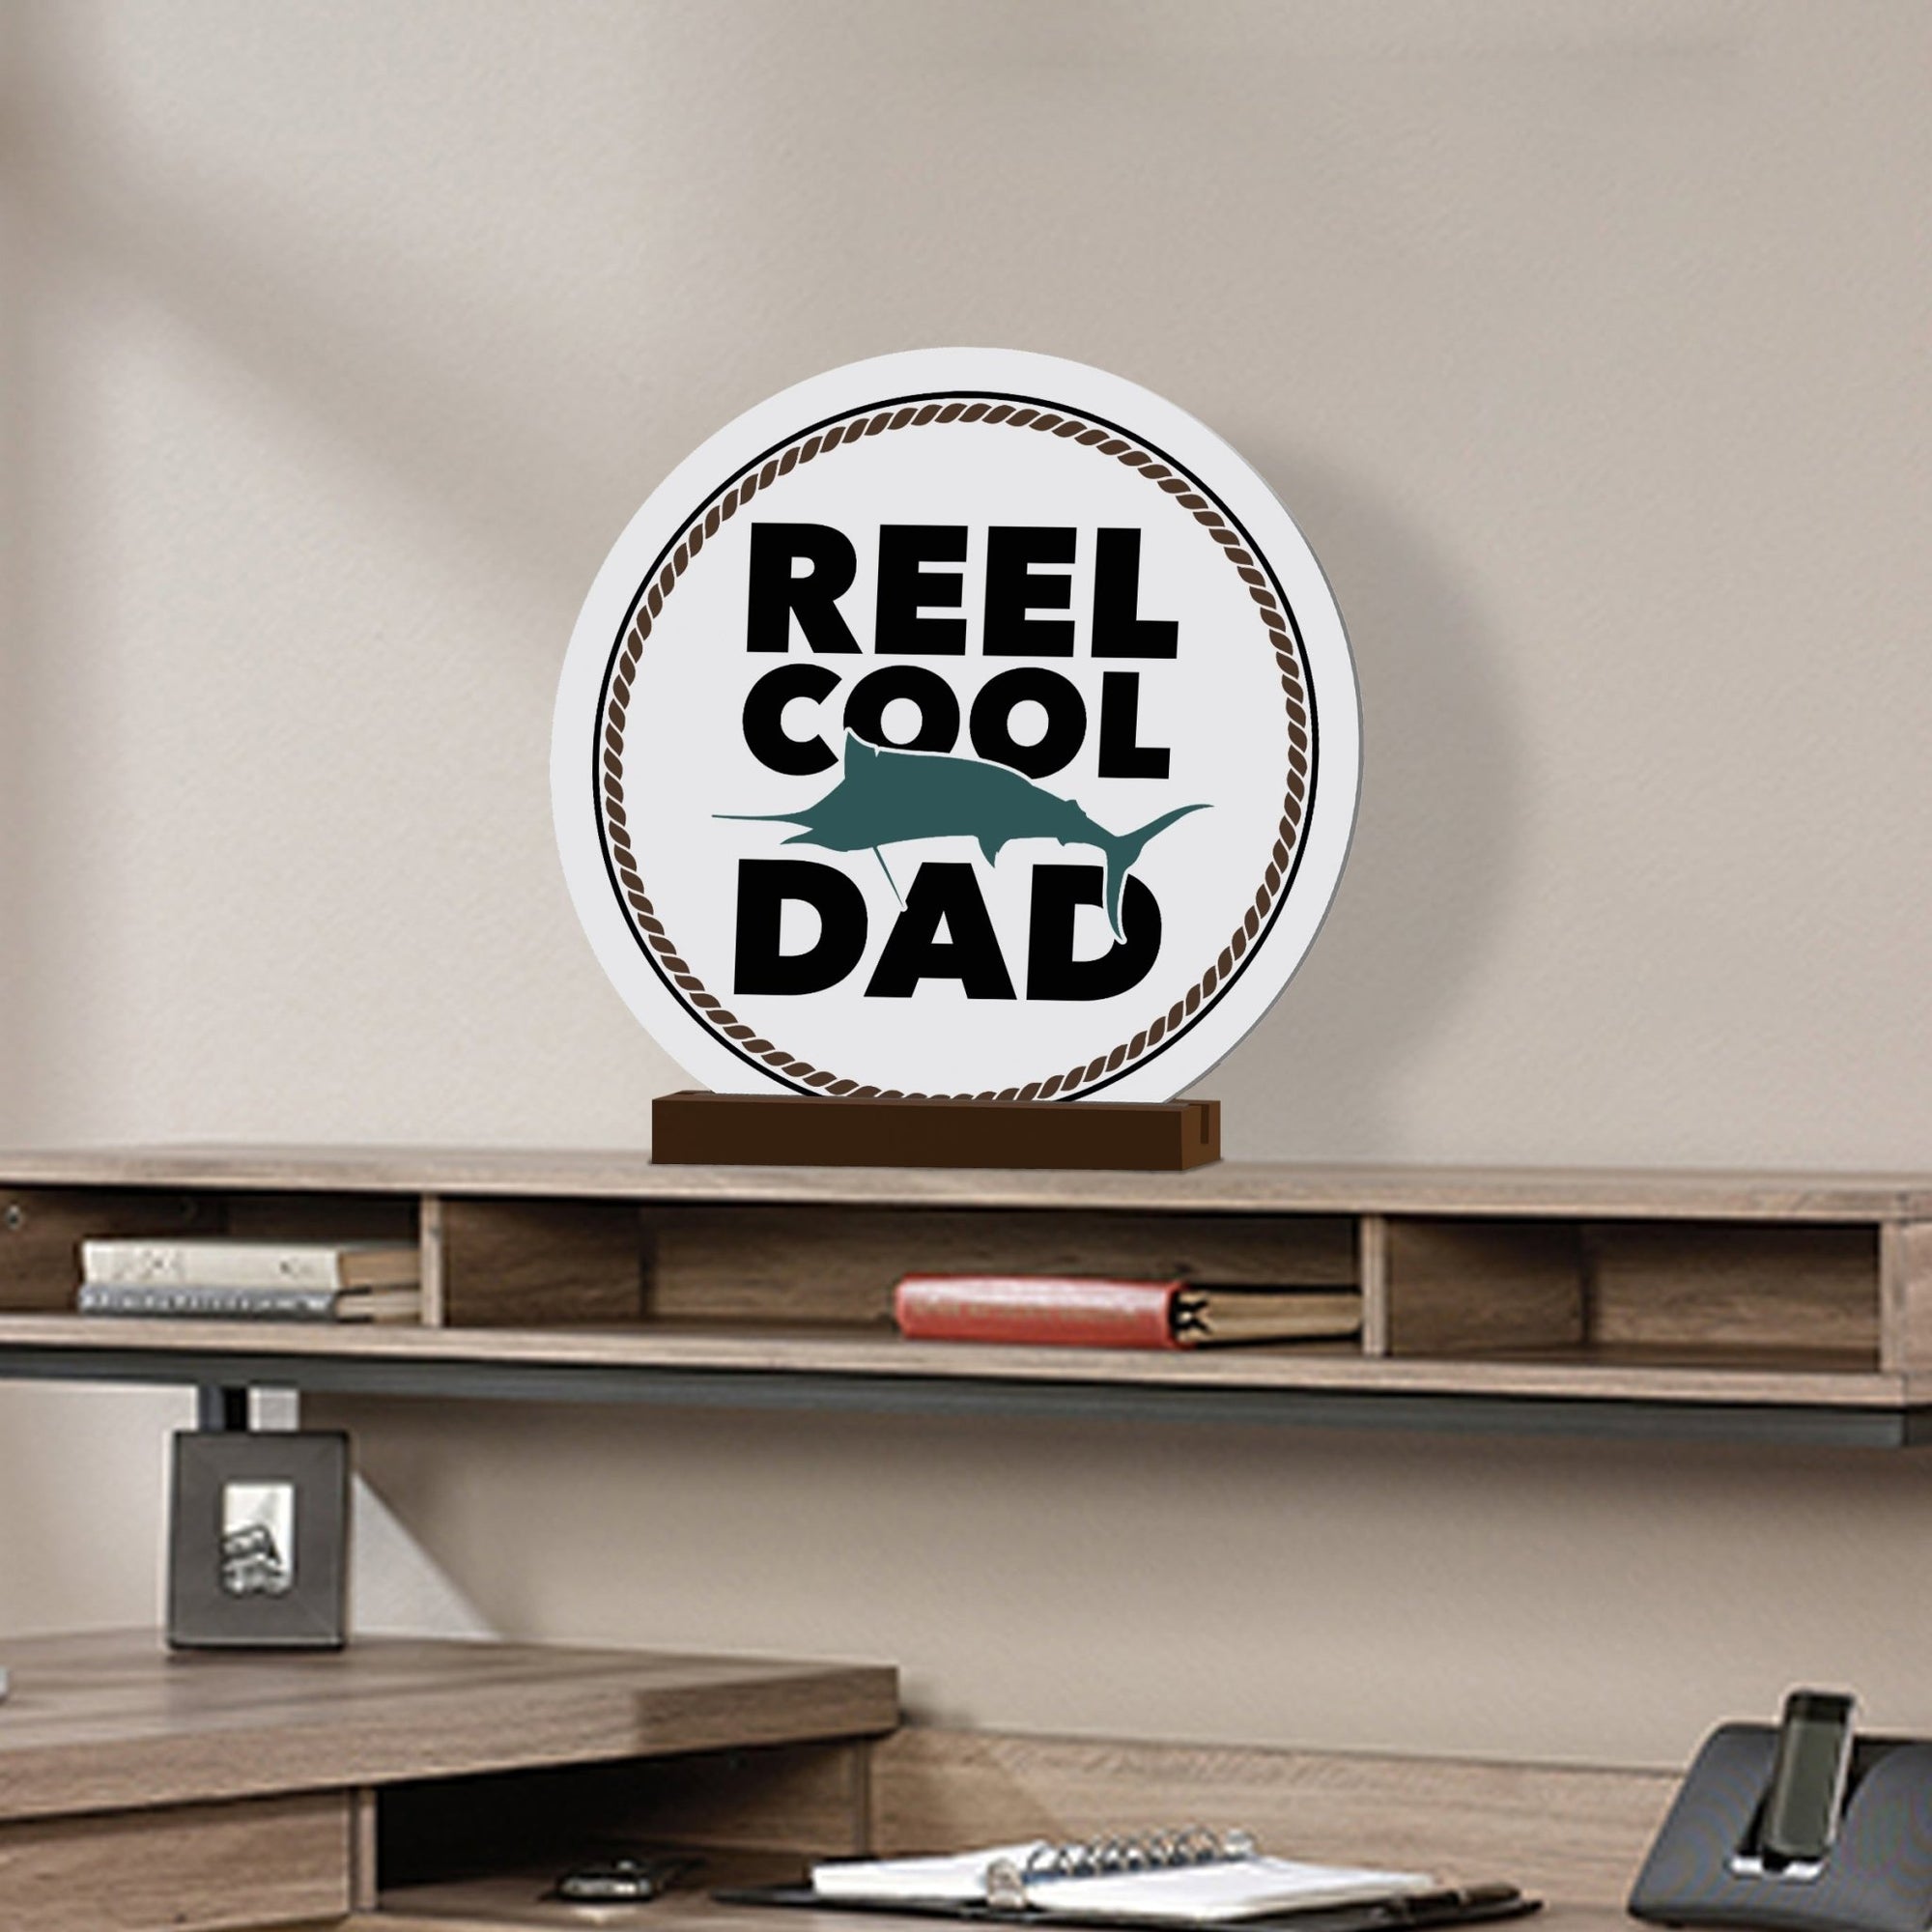 Minimalist White Round Sign With Wooden Base For A Fisherman Dad Gift Ideas - Reel Cool Dad - LifeSong Milestones